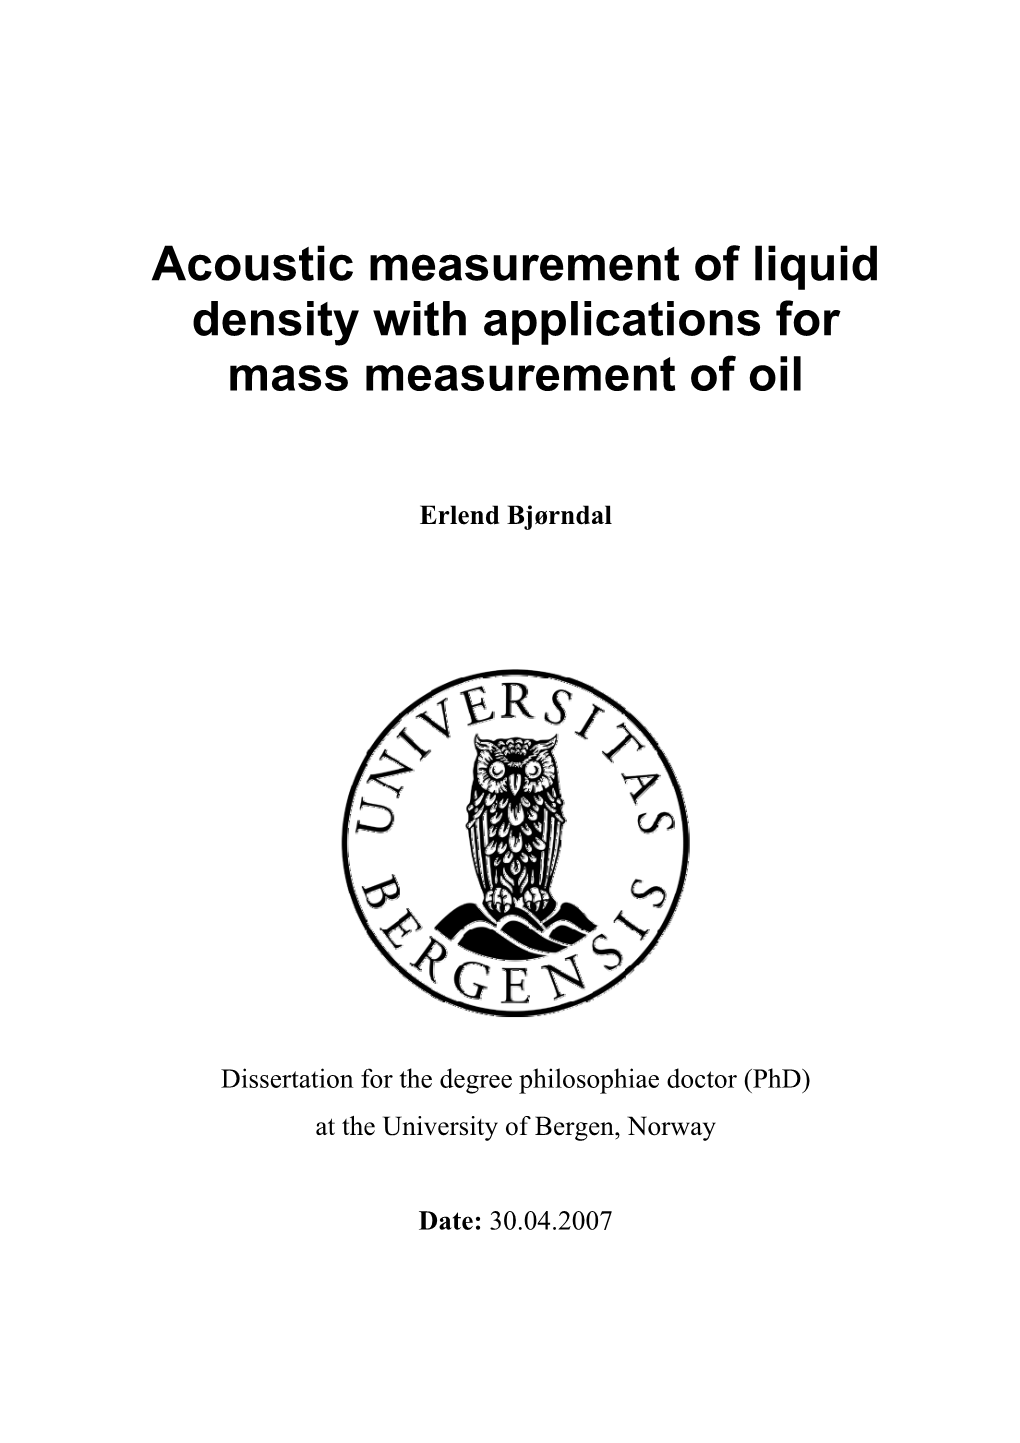 Acoustic Measurement of Liquid Density with Applications for Mass Measurement of Oil